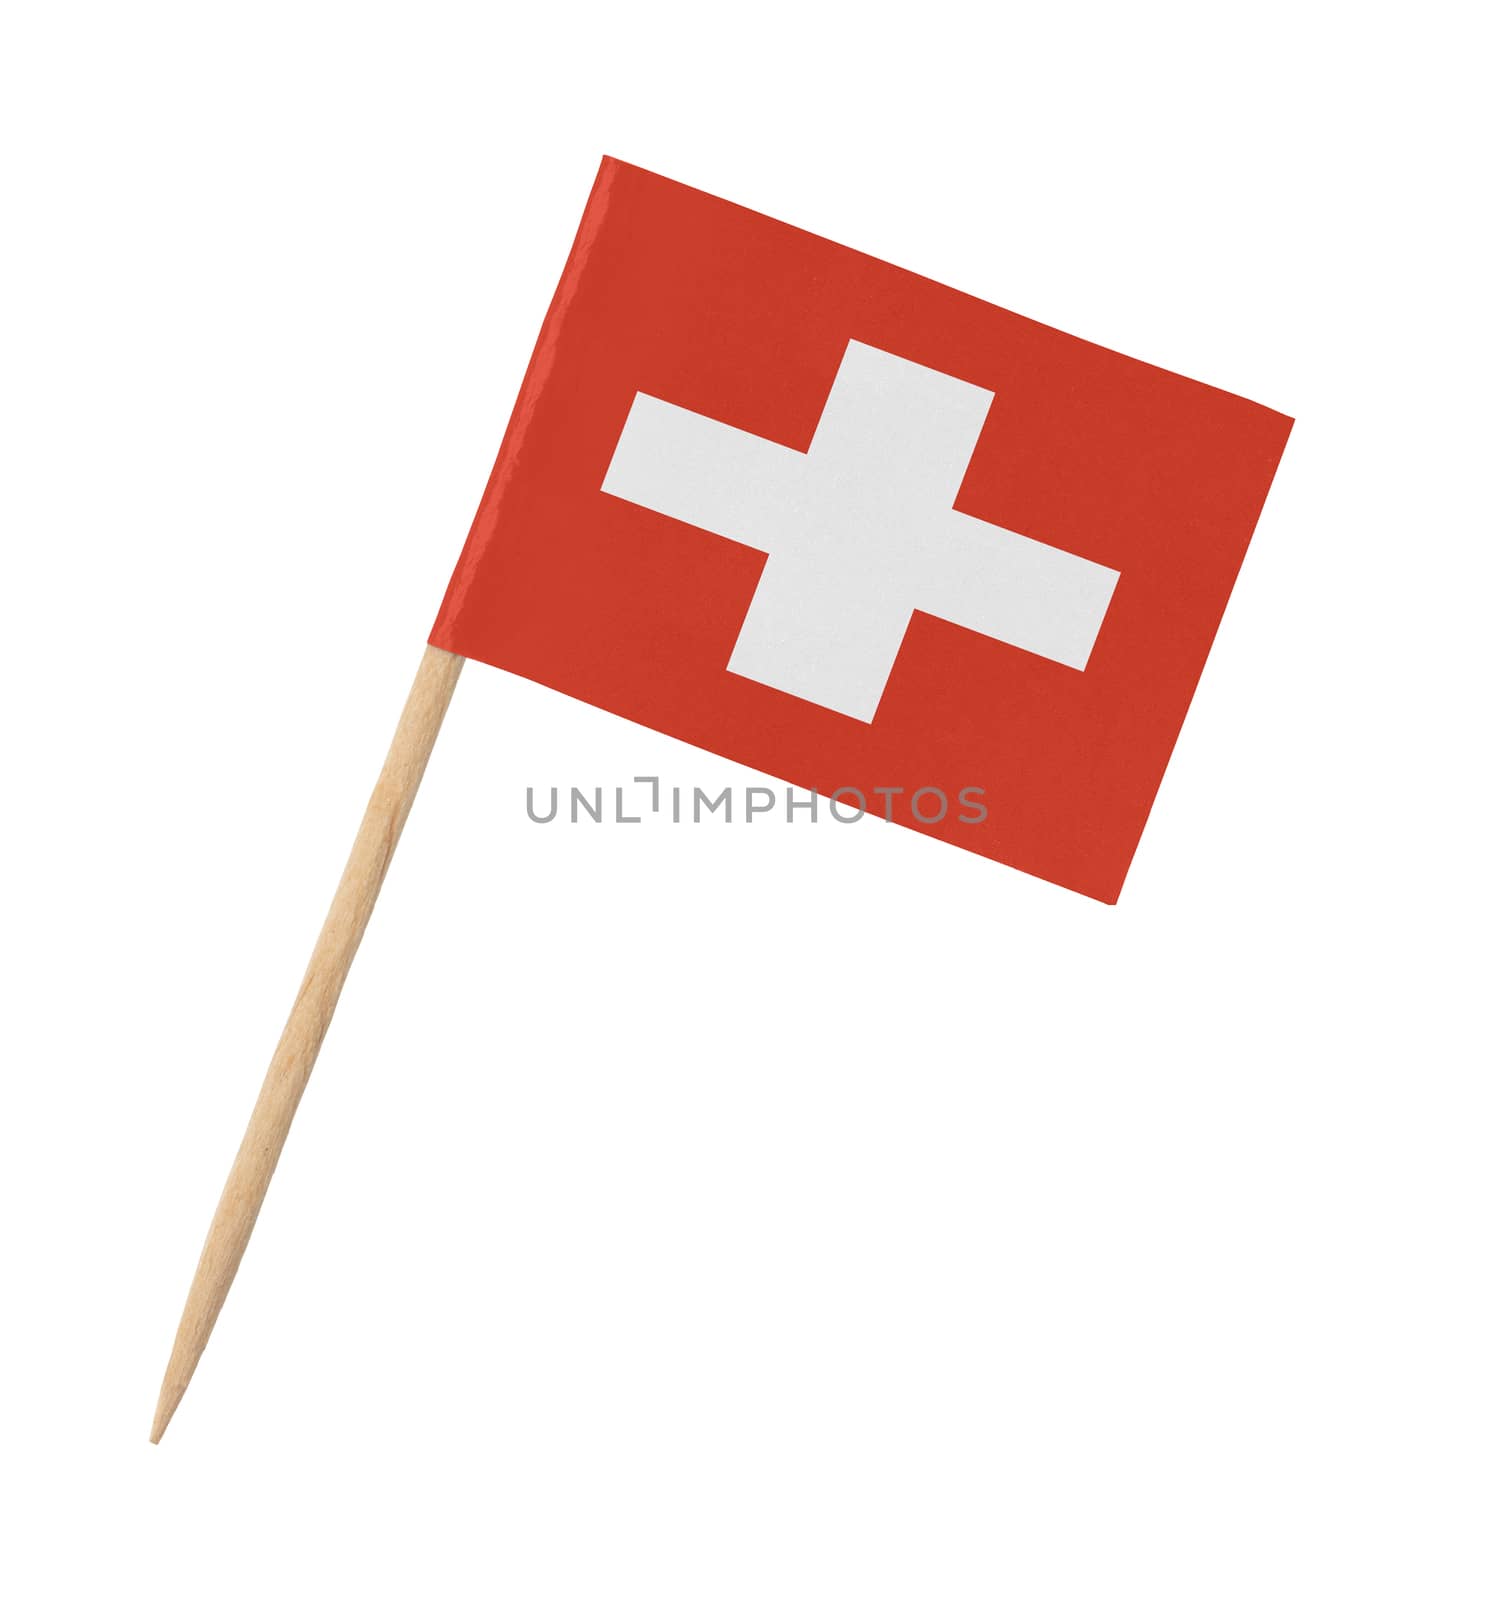 Small paper flag of Switzerland on wooden stick, isolated on white